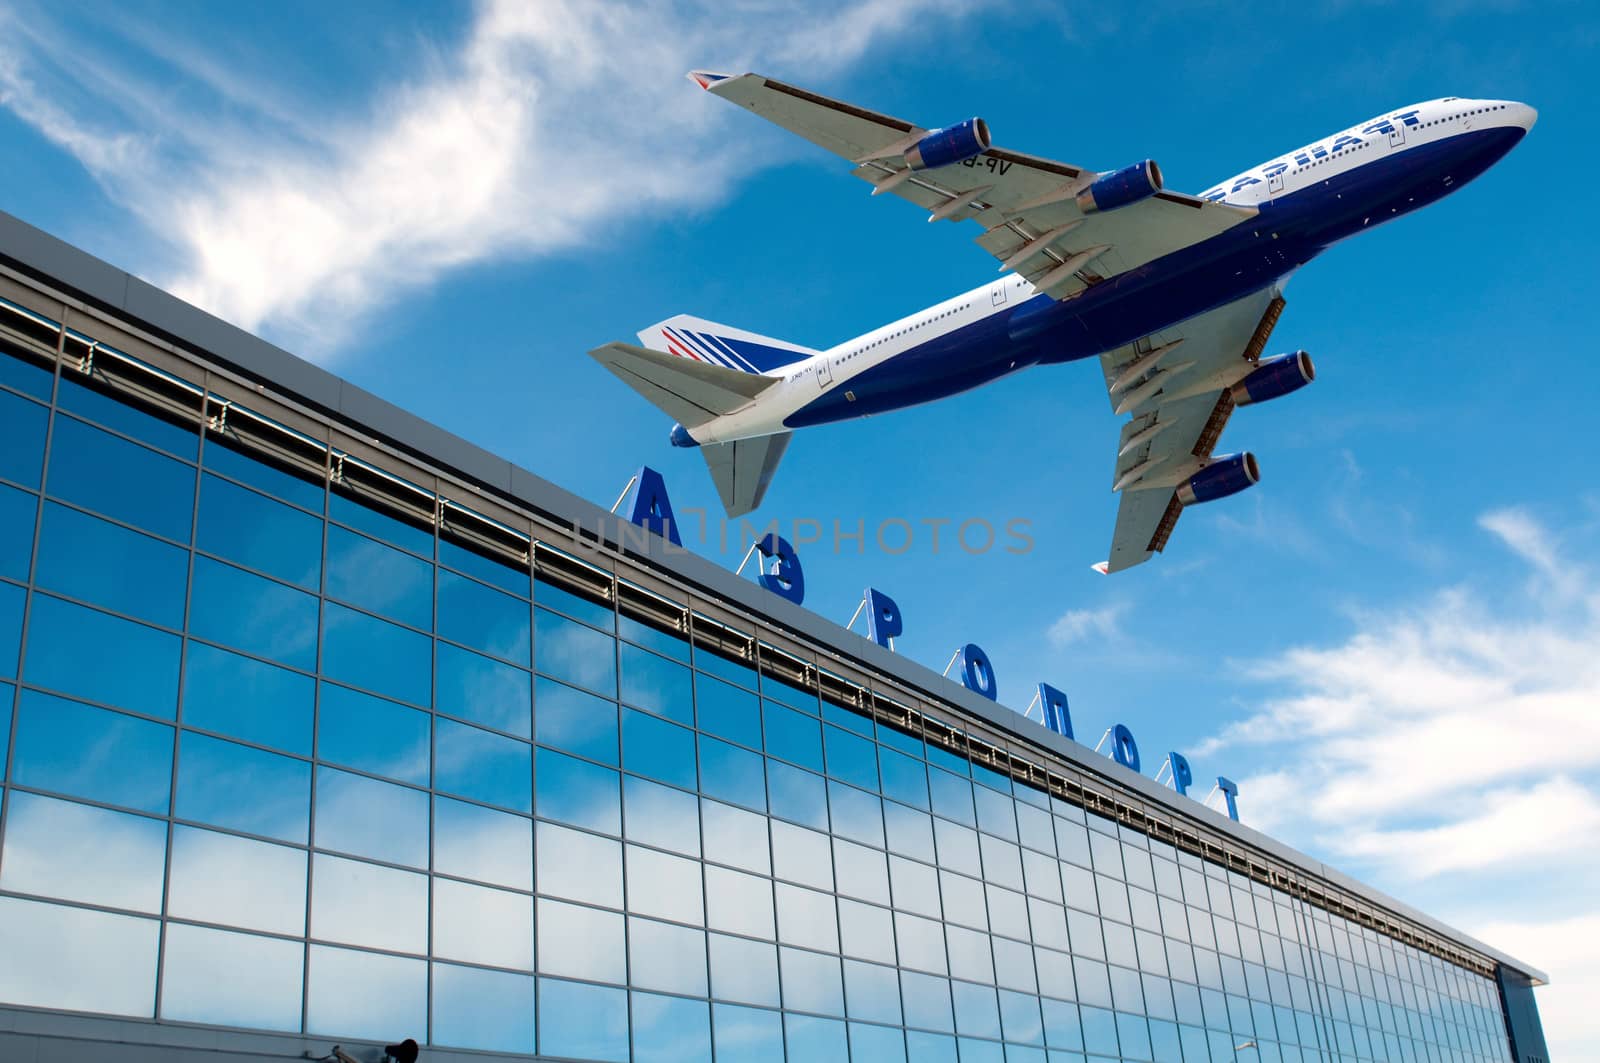 The modern russian airport with airplane over it